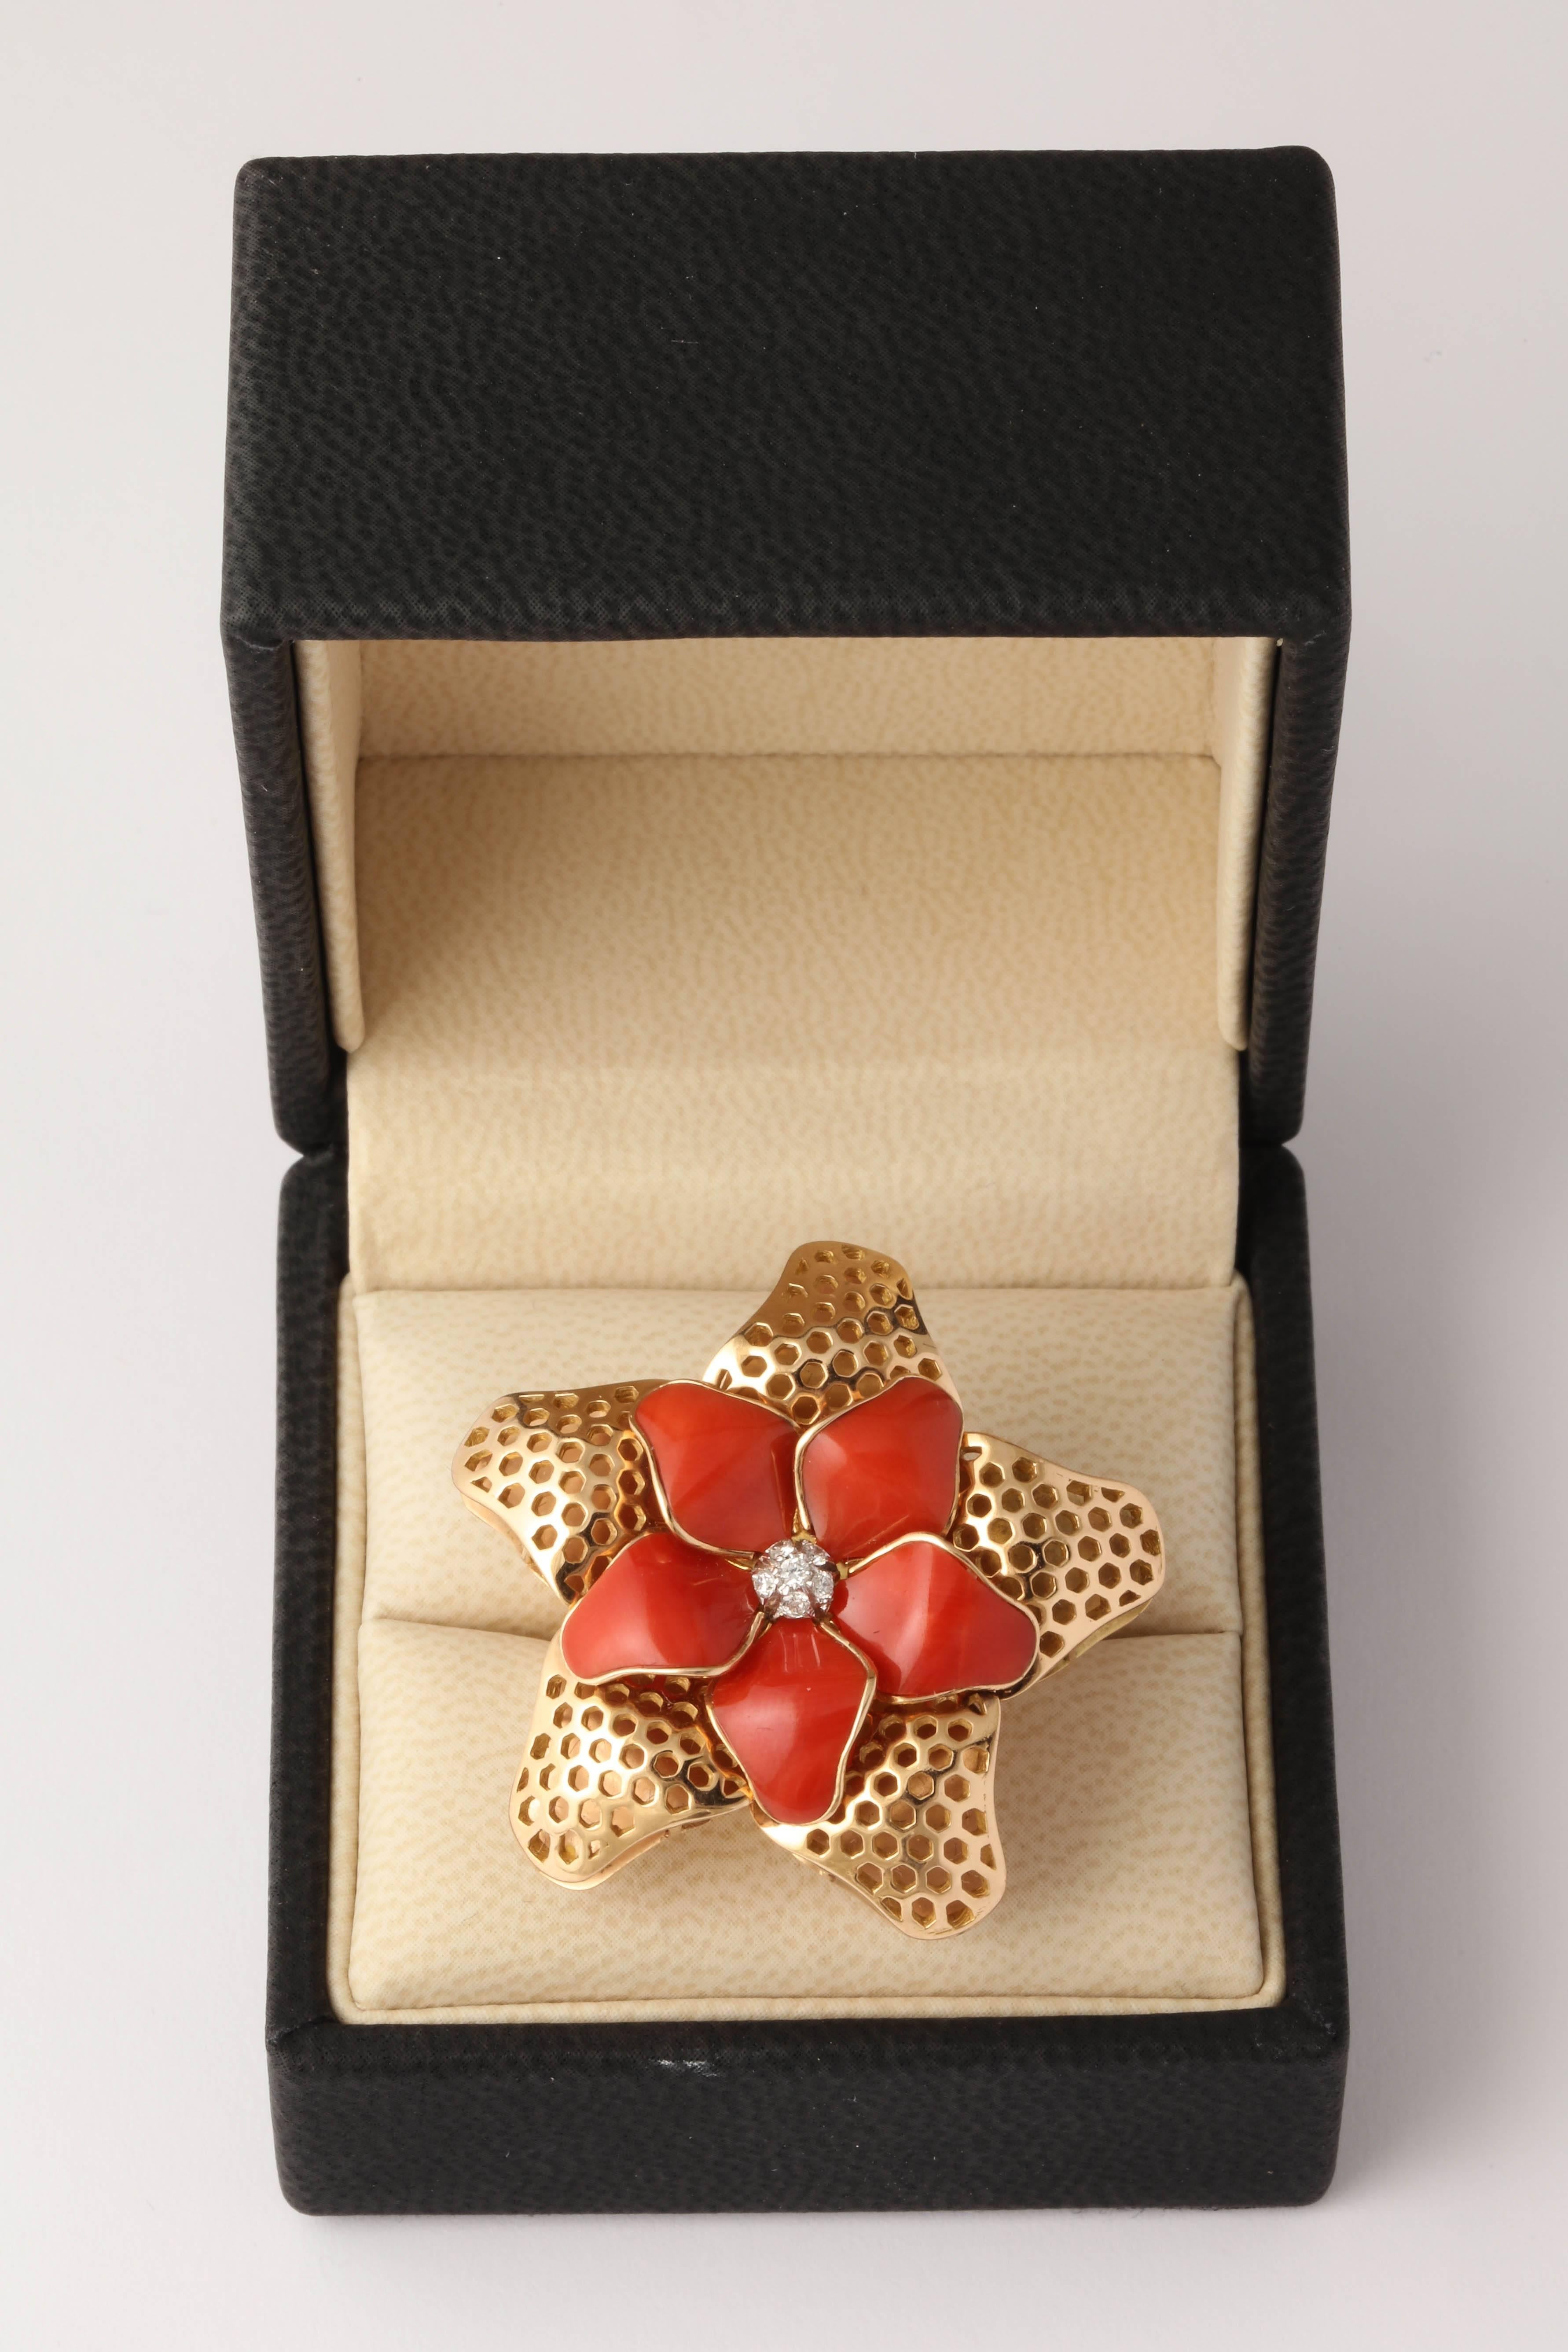 One 18kt Gold Made In France Large Custom Cut Coral and Diamond Figural Starfish And Pin Wheel Deign Flower Ring With Five Custom cut Beautiful Color Coral Pieces . Gold Work Magnificently Made With Reticulated Texture Within The Ring. Current Size